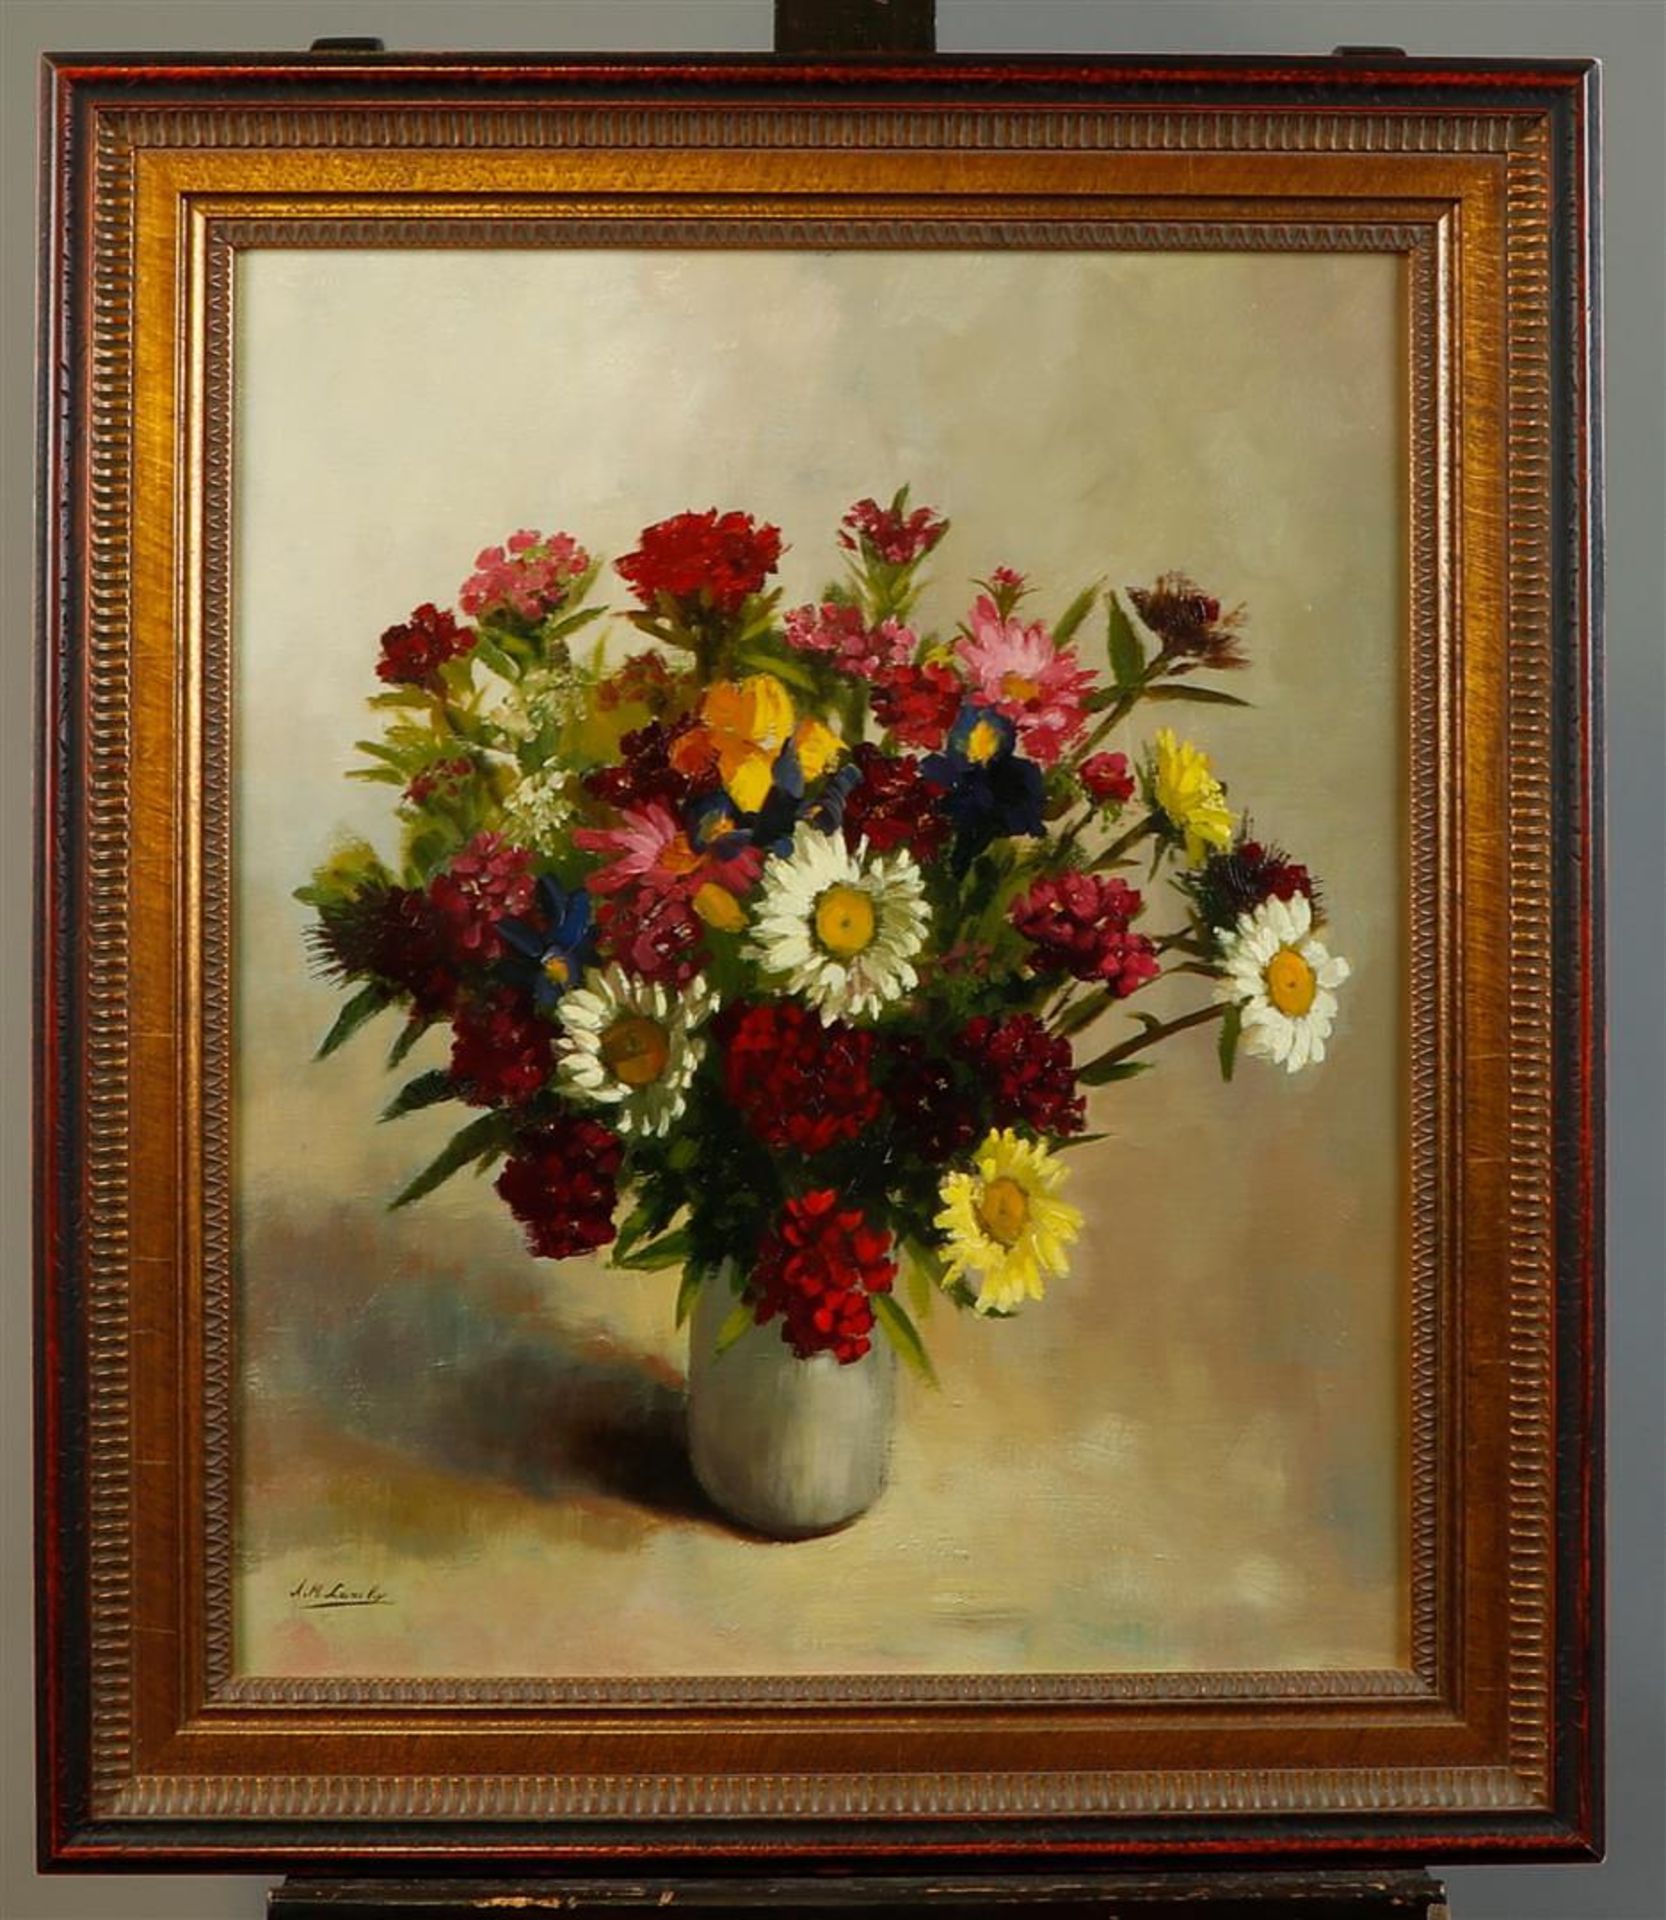 Unknown, 20th century. Flower still life, signed, oil on canvas. - Image 2 of 4